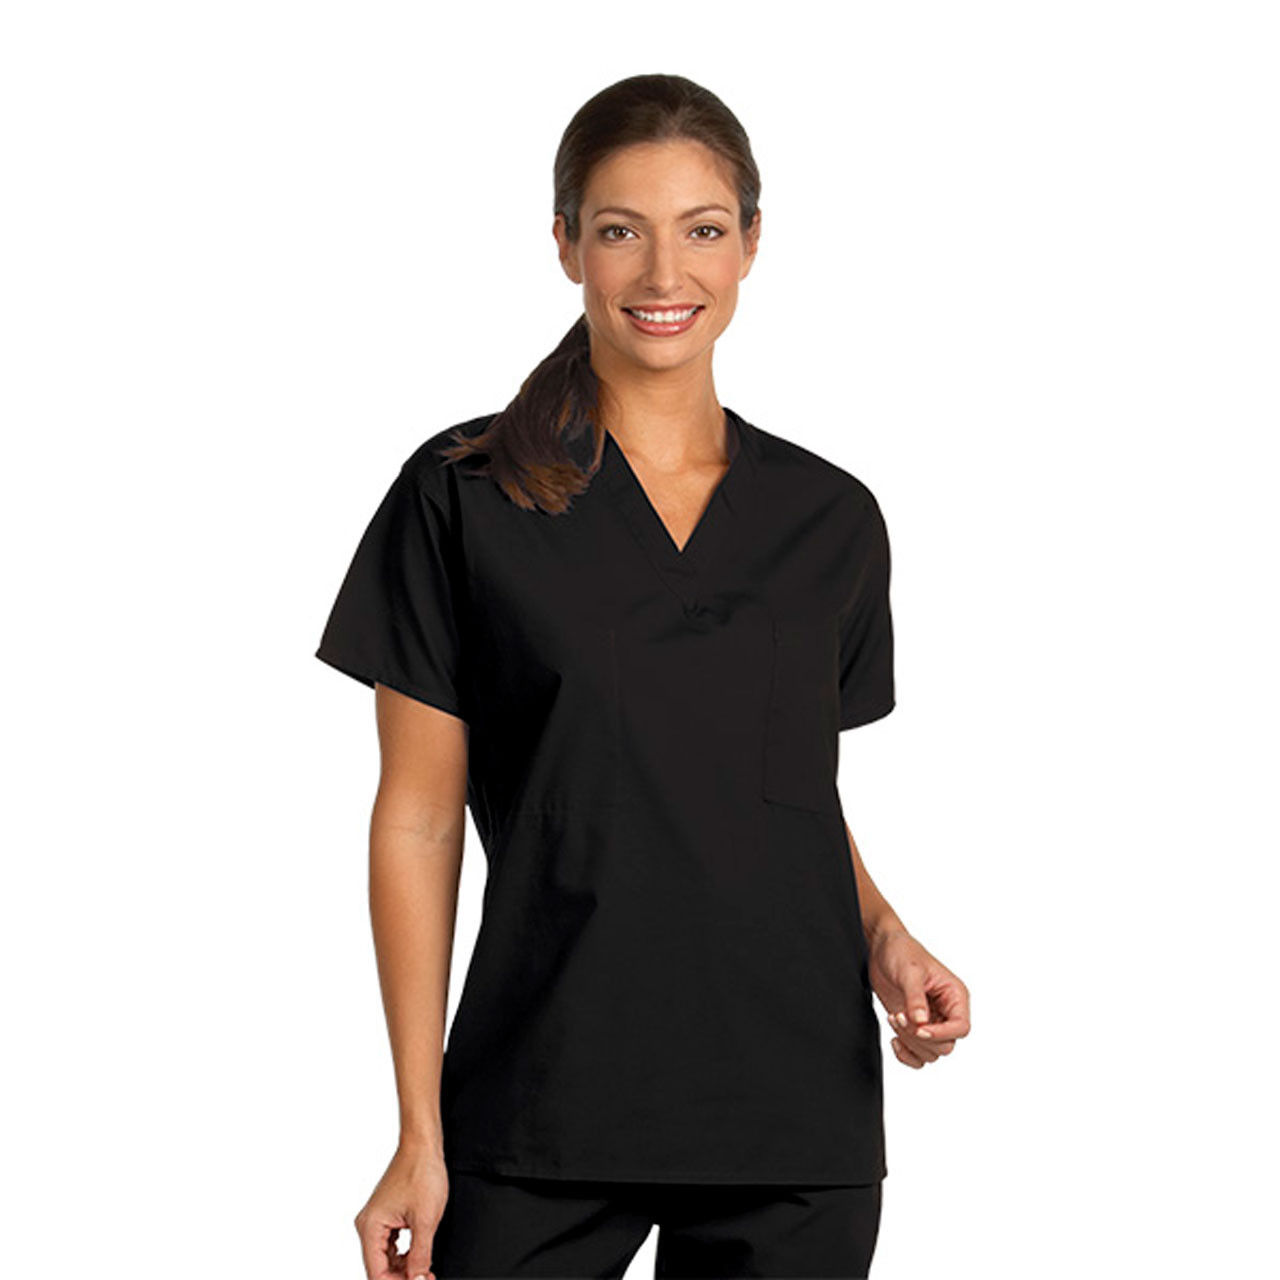 Can both men and women wear these black medical scrubs?